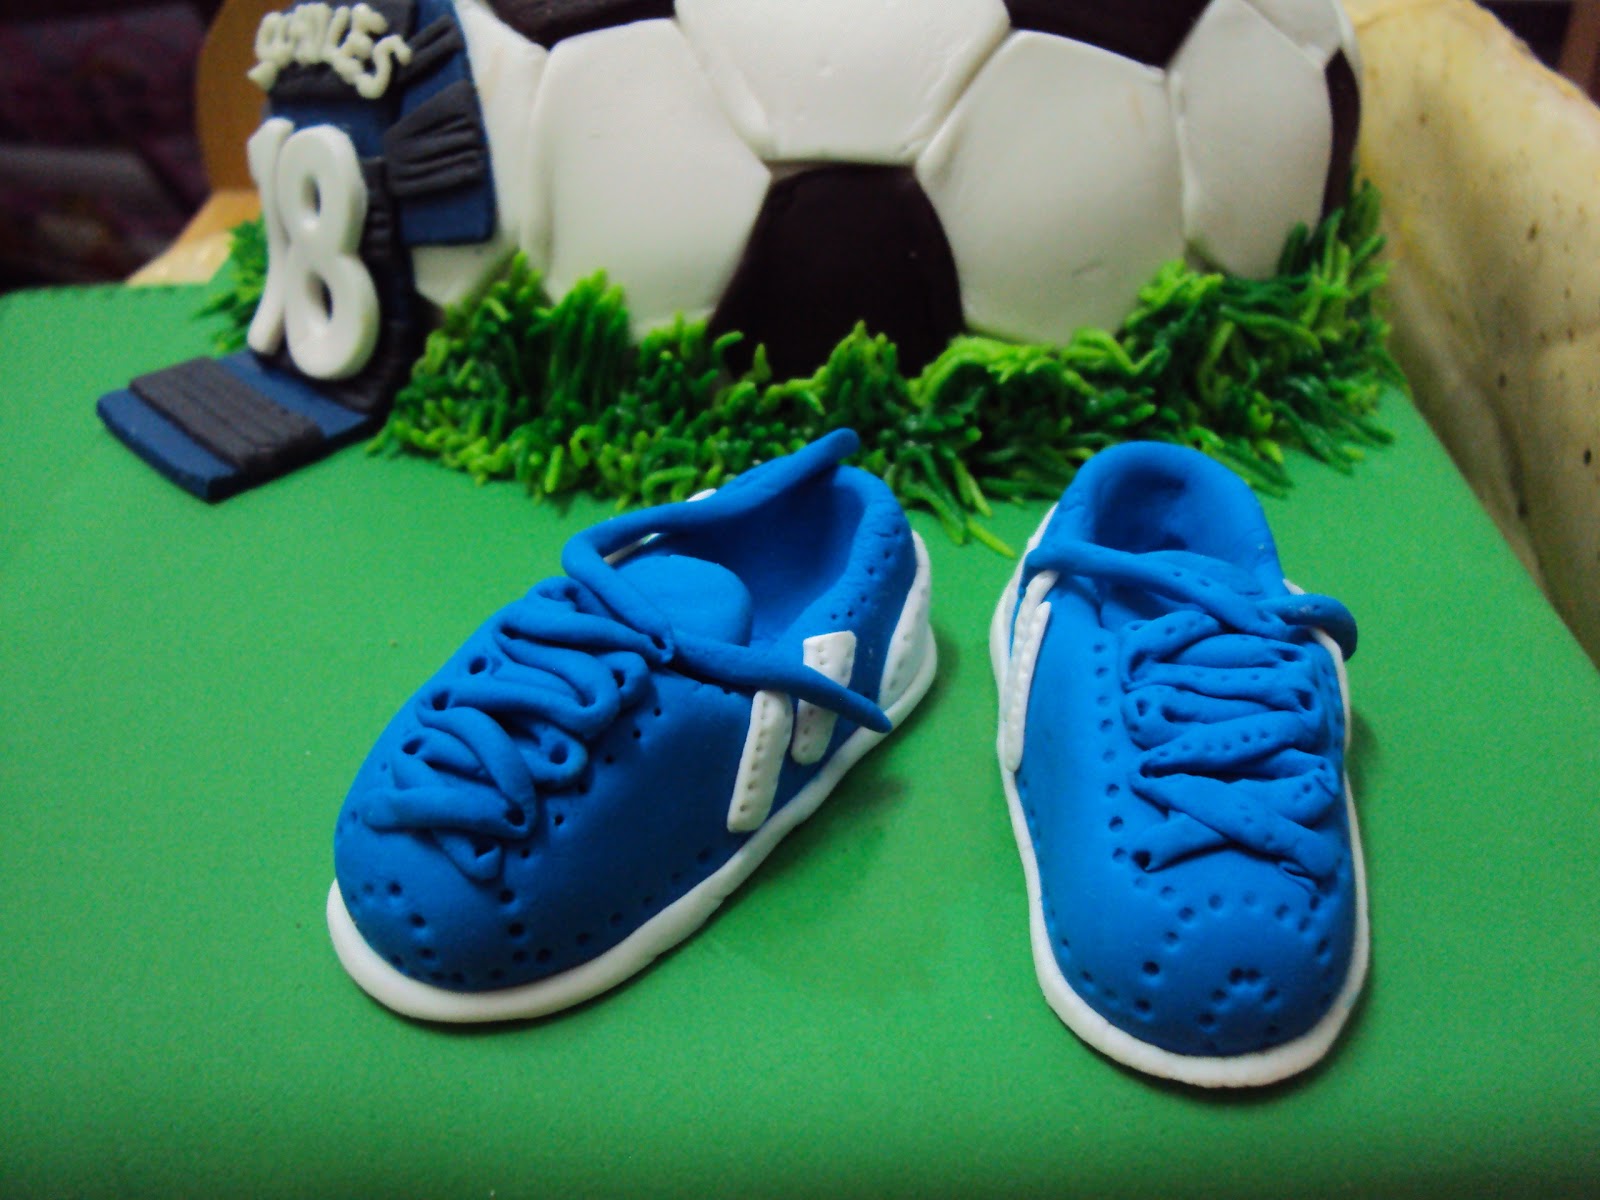 L'mis Cakes & Cupcakes Ipoh Contact : 012-5991233 : Soccer Field ...